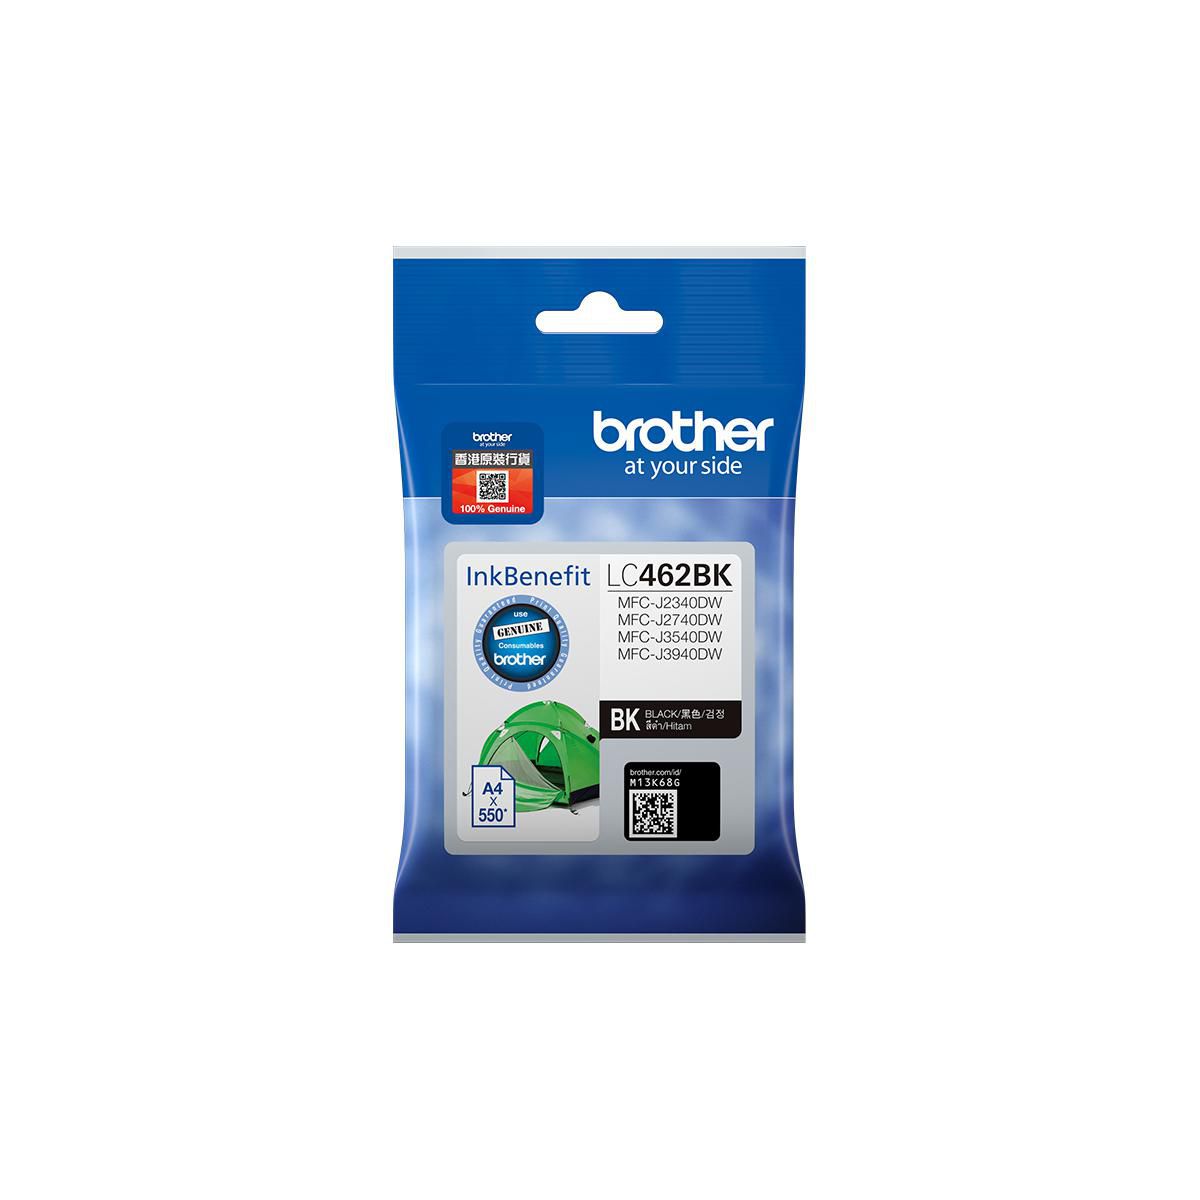 W128601064 Brother LC462BK ink cartridge 